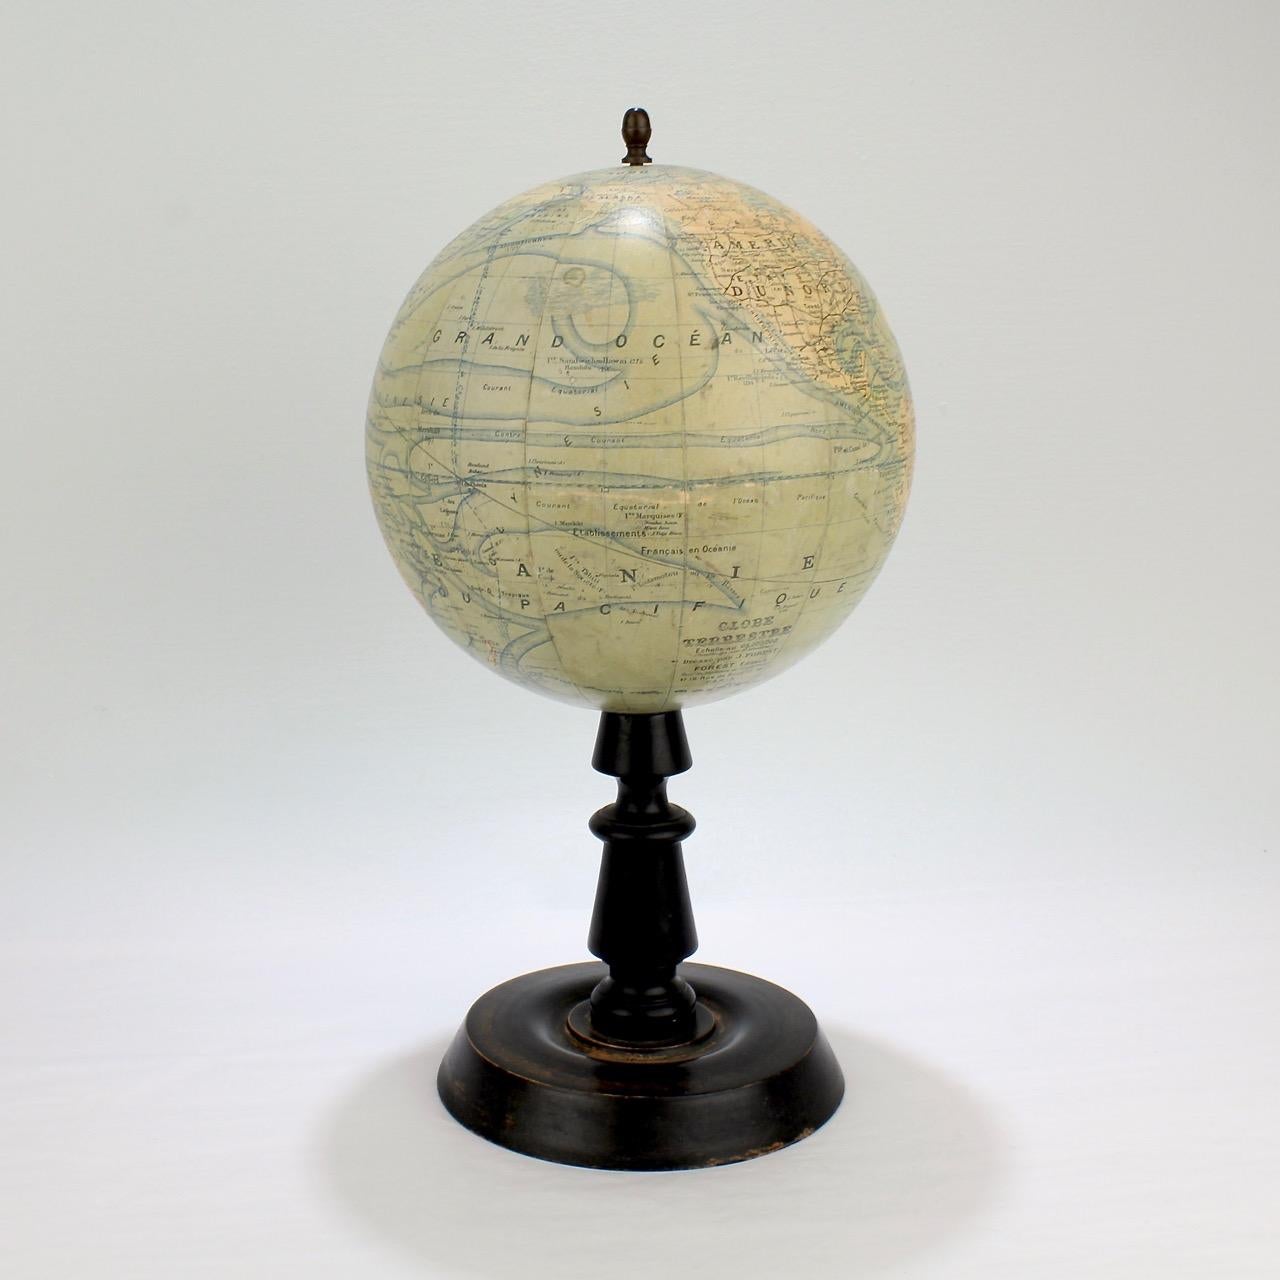 Antique French Terrestrial Globe on Wooden Stand by J. Forest of Paris 1